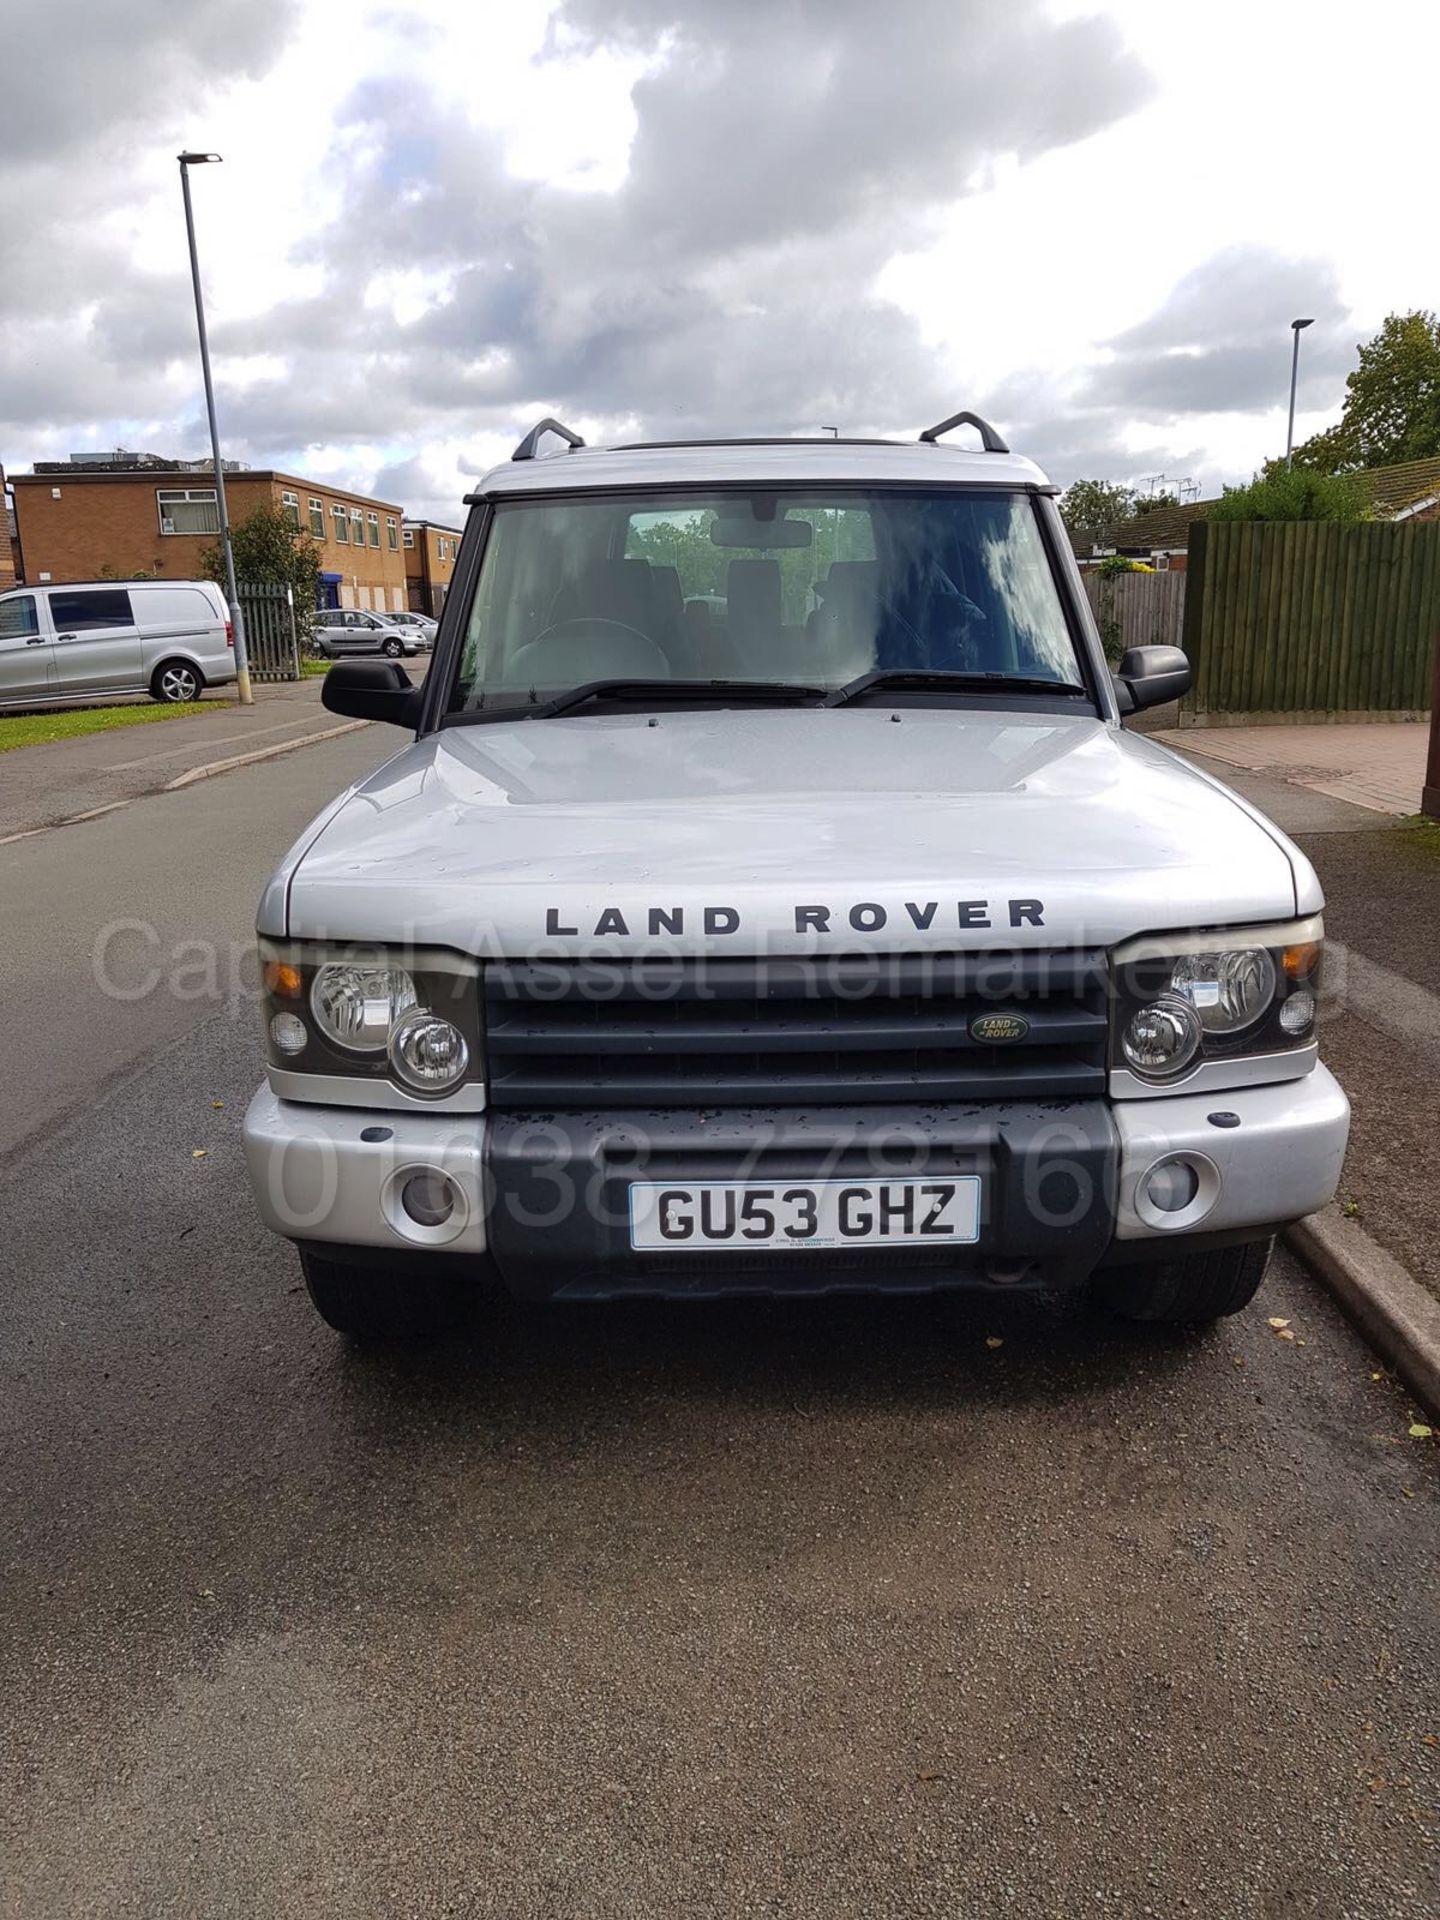 (On Sale) LAND ROVER DISCOVERY 'GS EDITION' (2004 MODEL) 'TD5 - AUTO - 7 SEATER' (NO VAT - SAVE 20%) - Image 2 of 16